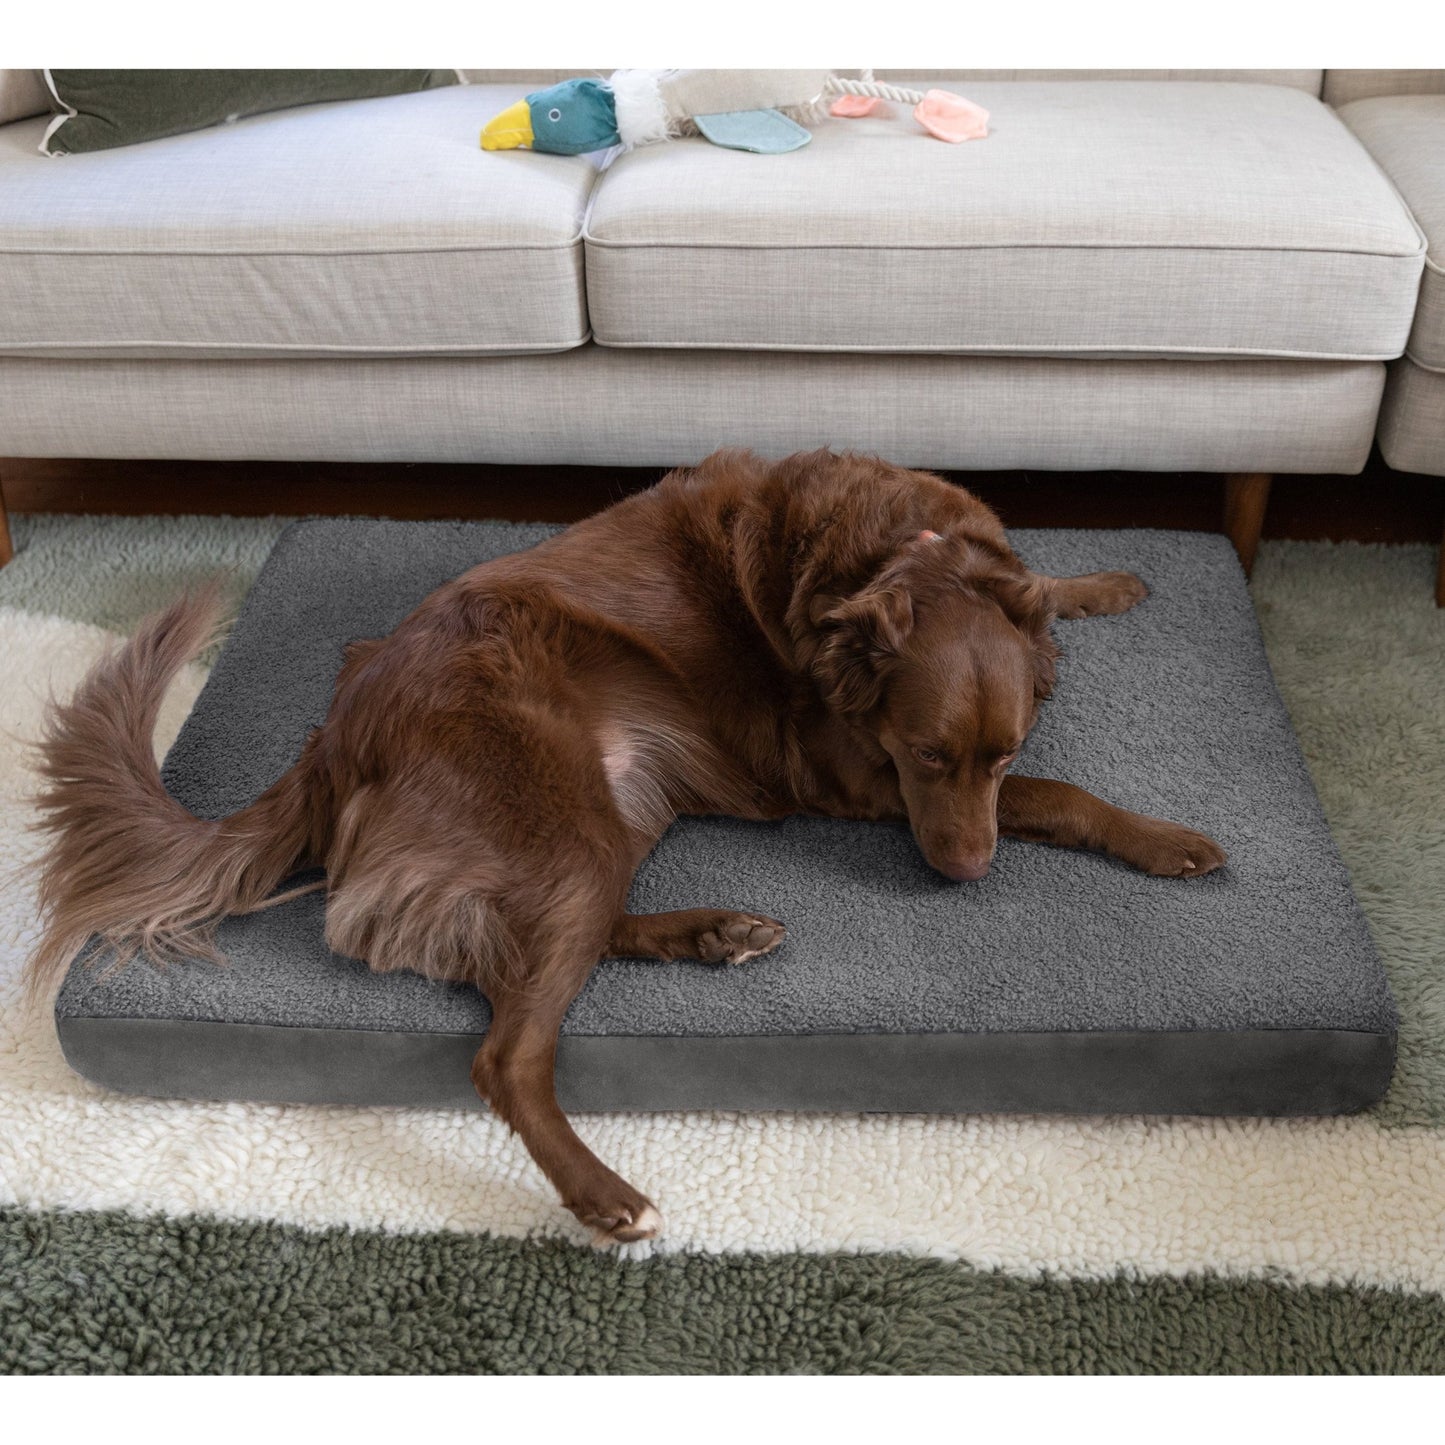 Jaxx Cubbi Dog Bed - Plush Boucle Sherpa Top for Cozy Comfort, Supportive Memory Foam for Joint Pain Relief, No - Slip Base for Stability, Machine Washable Cover and Waterproof Liner, Large (19752) - SchoolOutlet